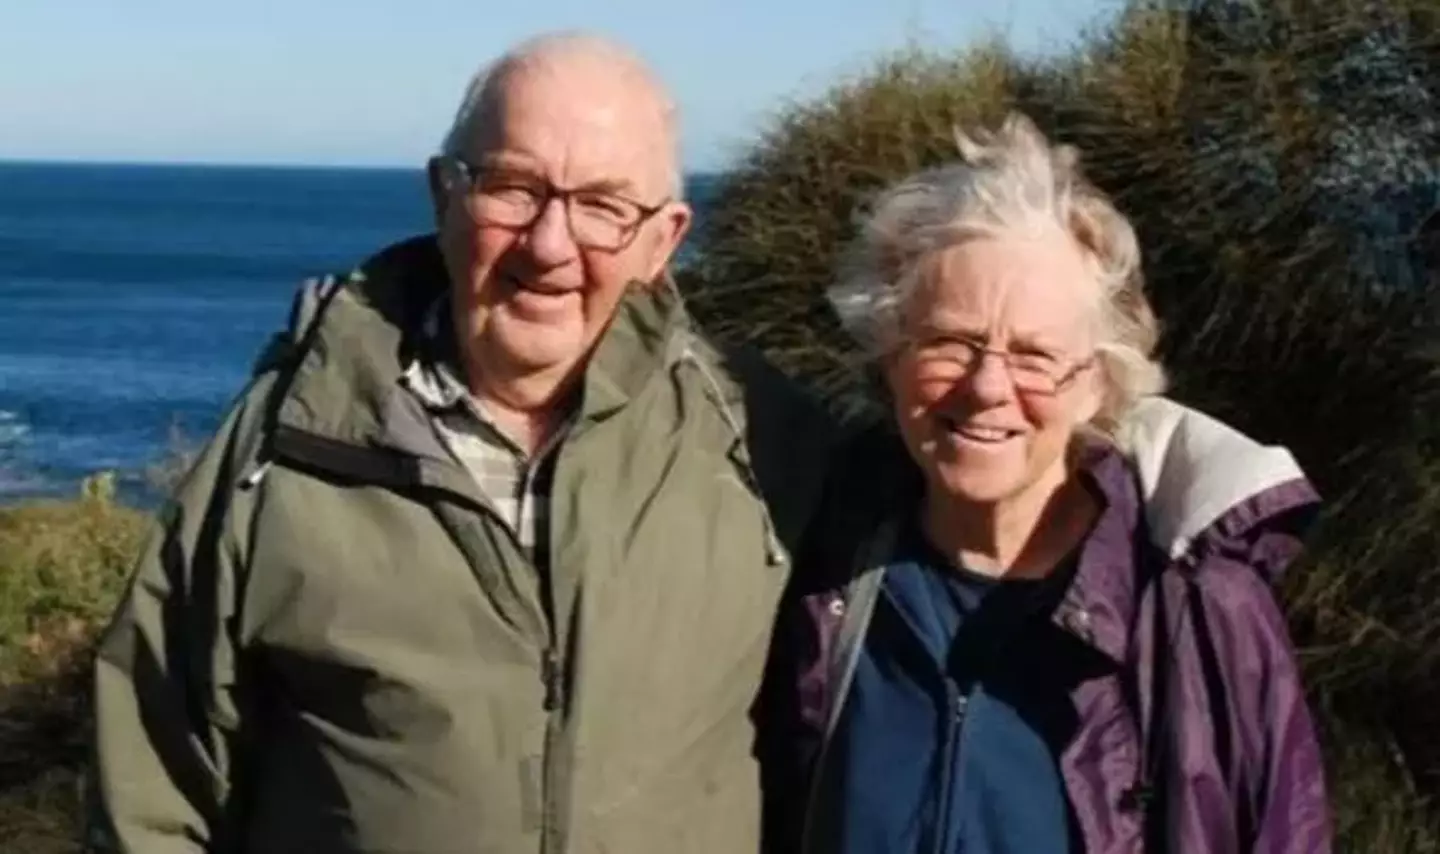 Parents Gail and Don Patterson both died at the age of 70 after they ate a meal on July 29 - for which police believe may have contained death cap mushrooms.